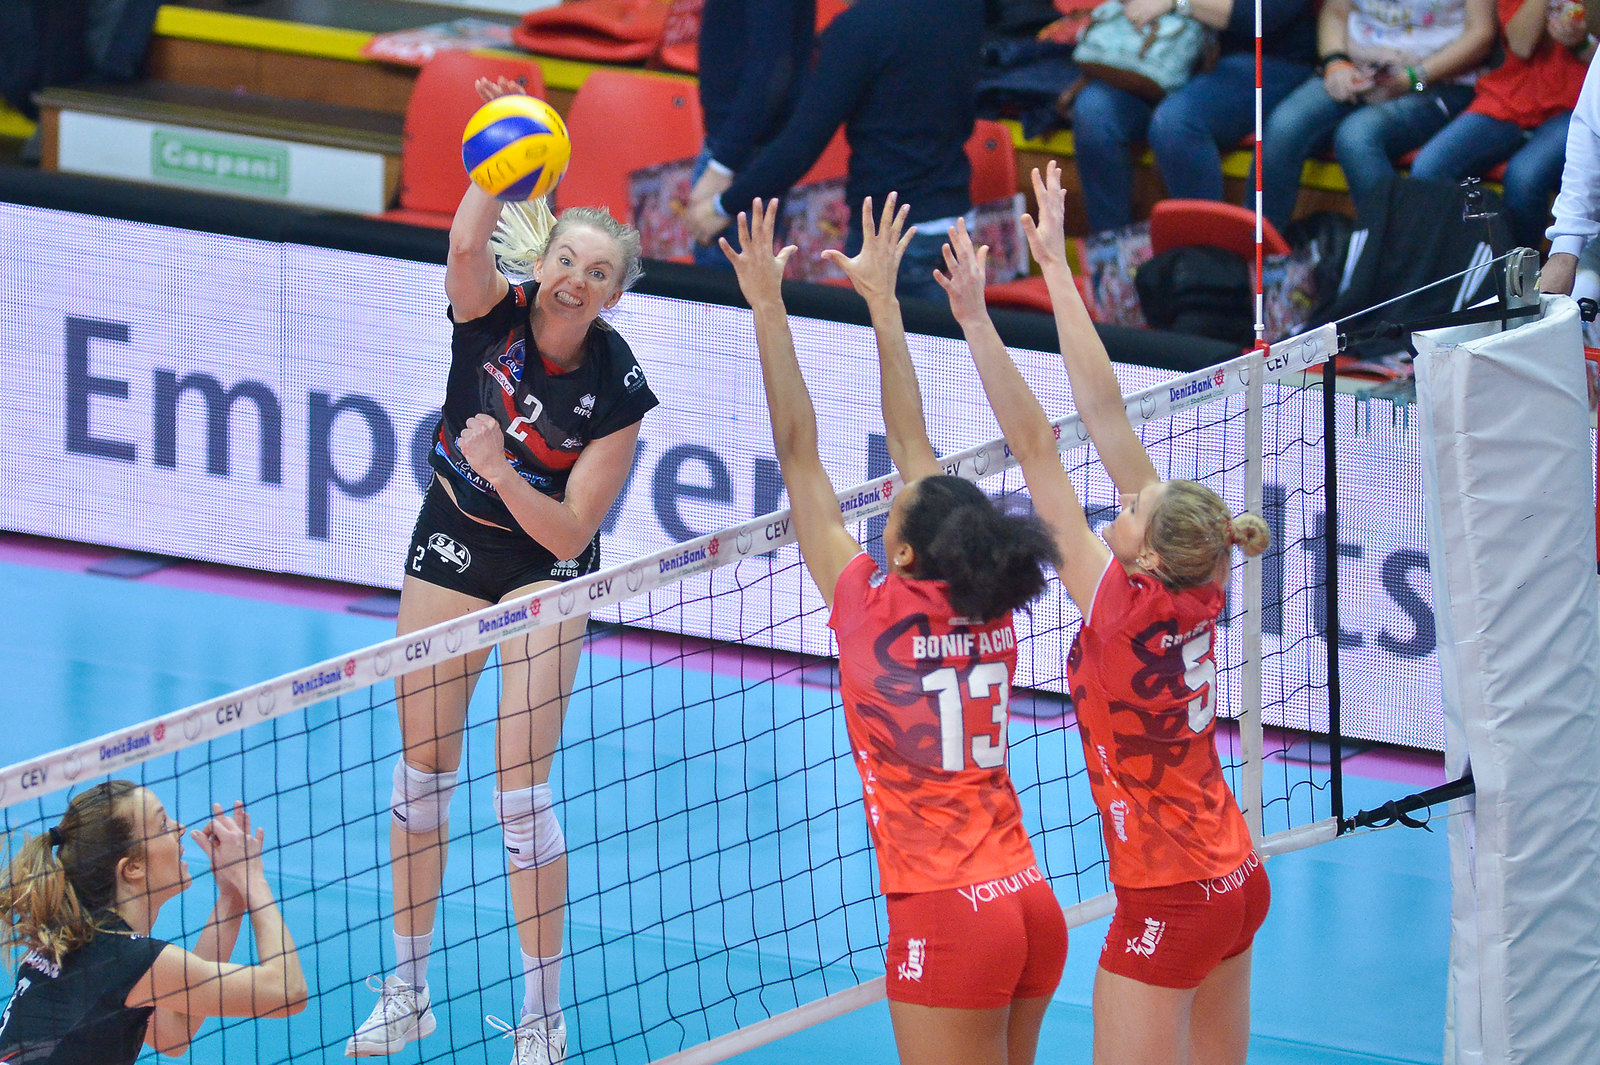 CEV Volleyball CUP 2019 - Yamamay E-Work Busto Arsizio - ASPTT Mulhouse VB